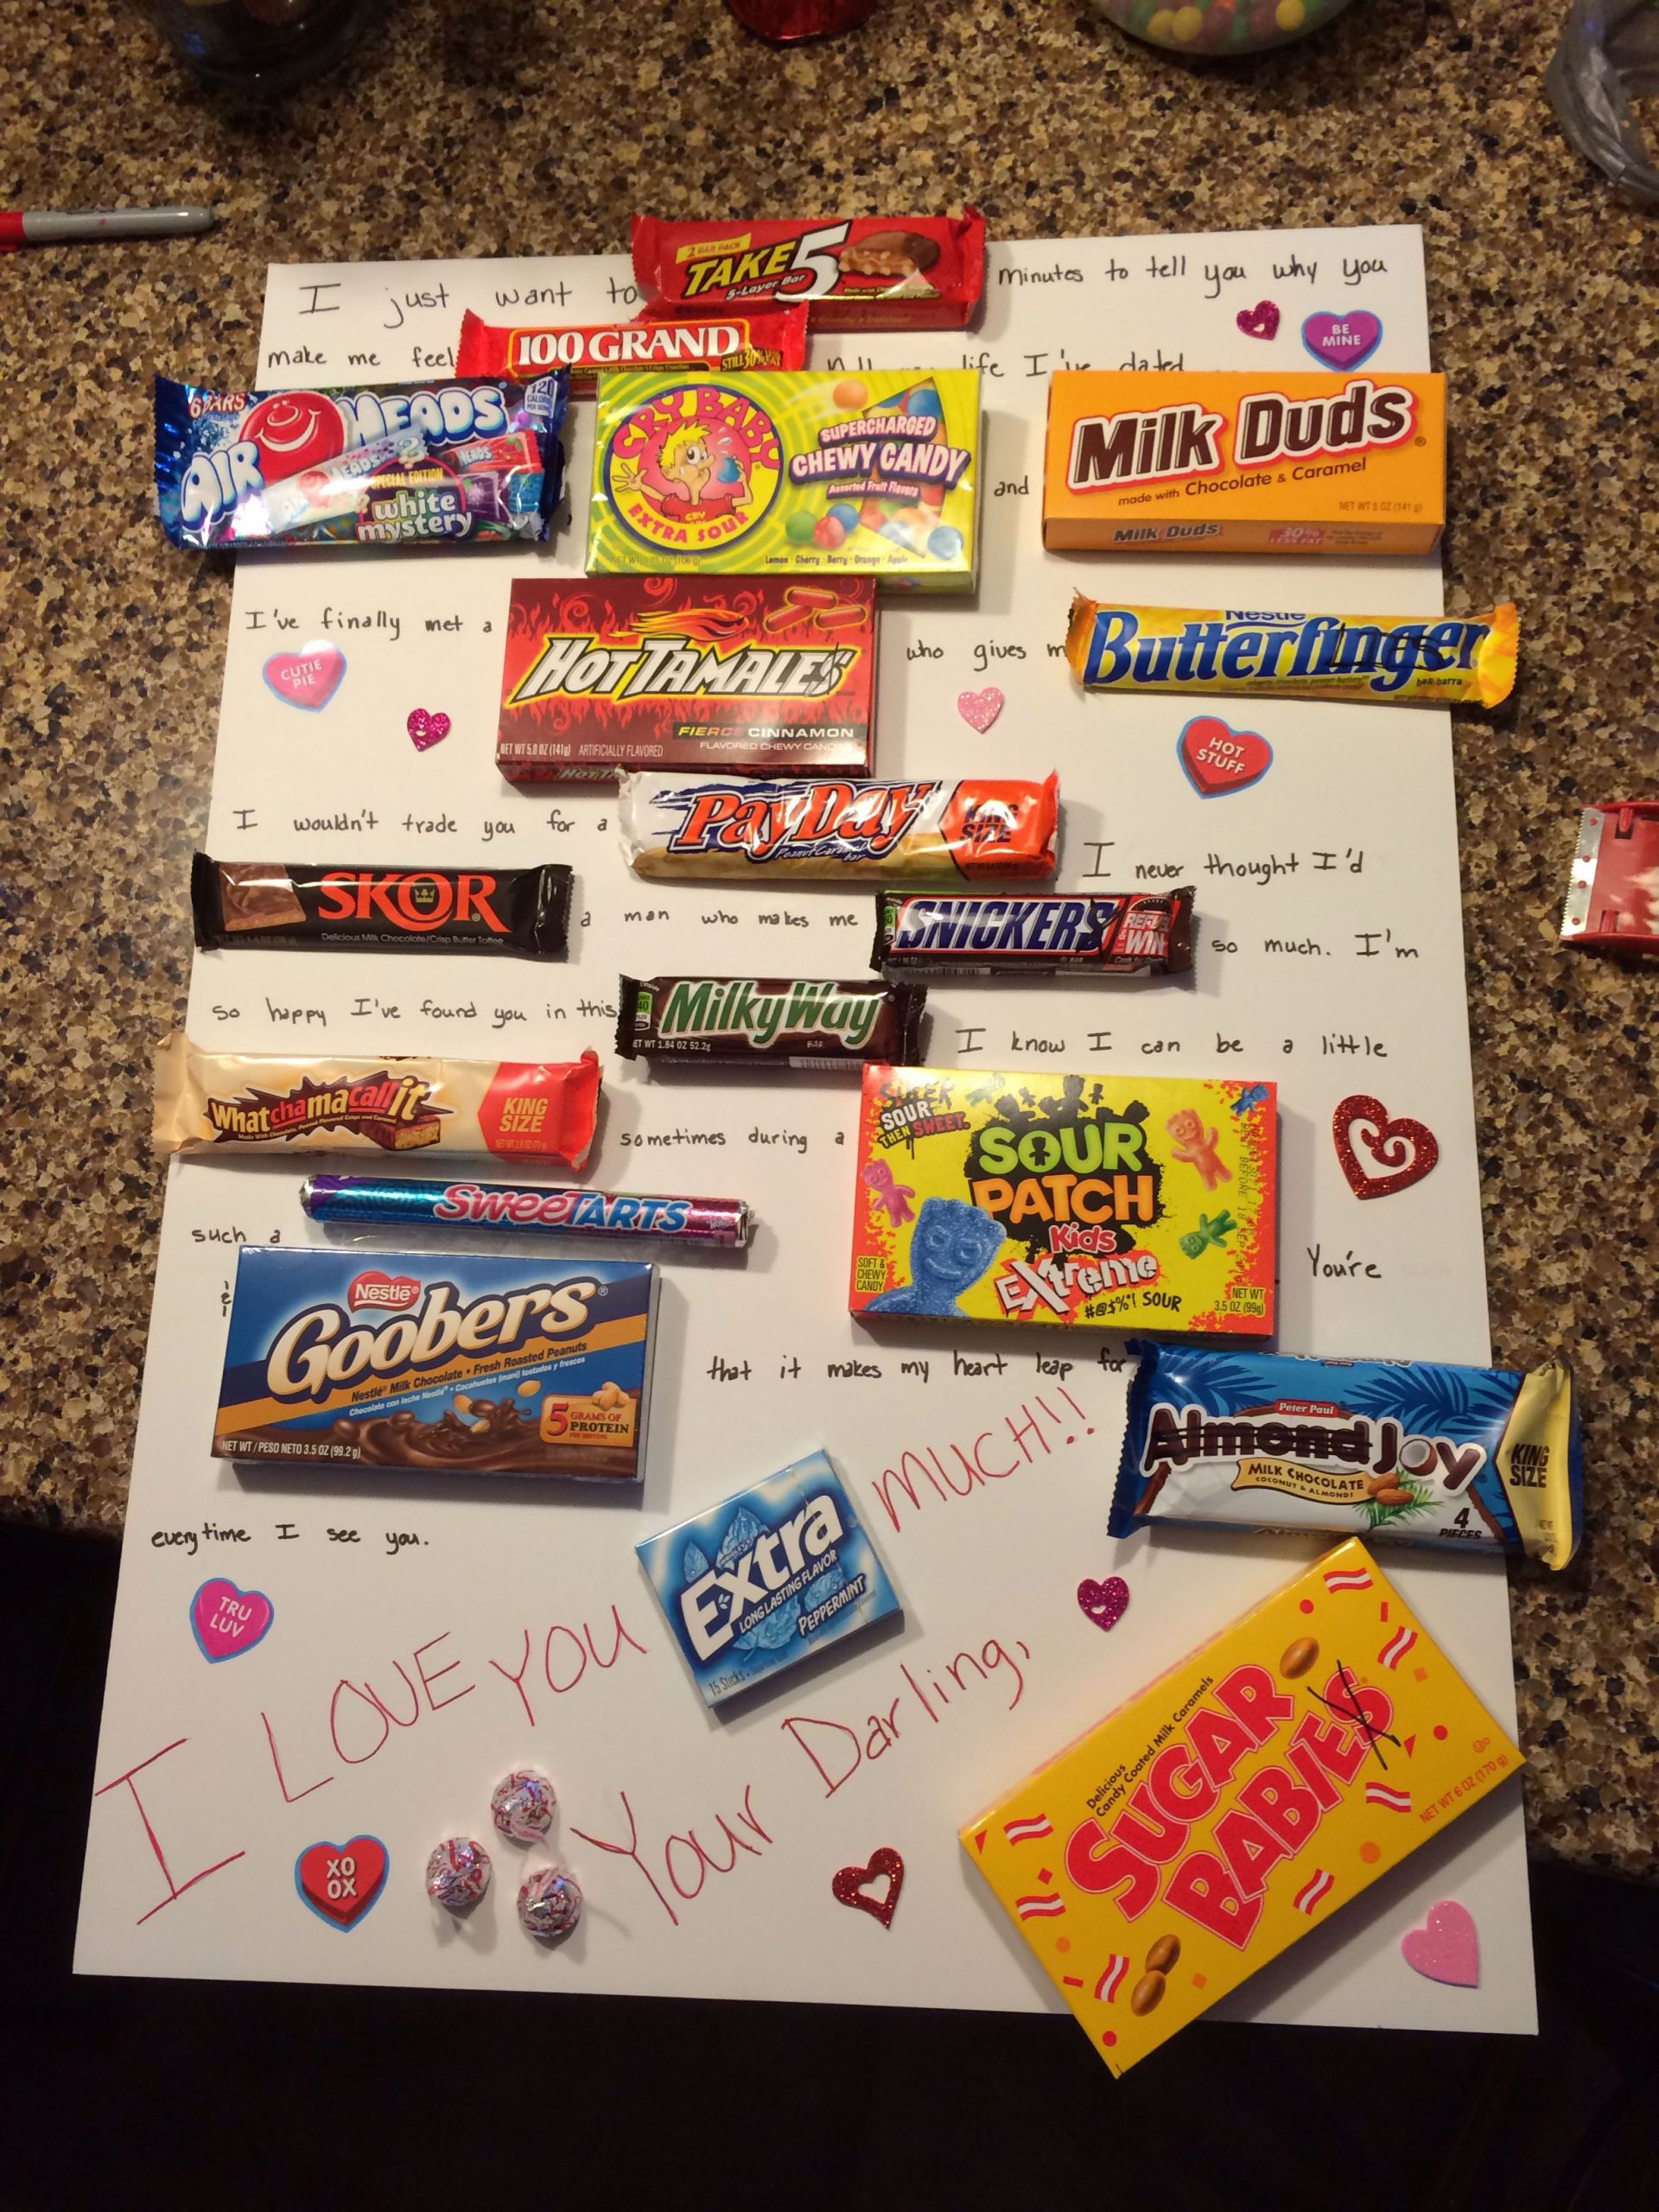 Valentines Day Card With Candy
 A Cute valentines day candy card my friend had the idea to